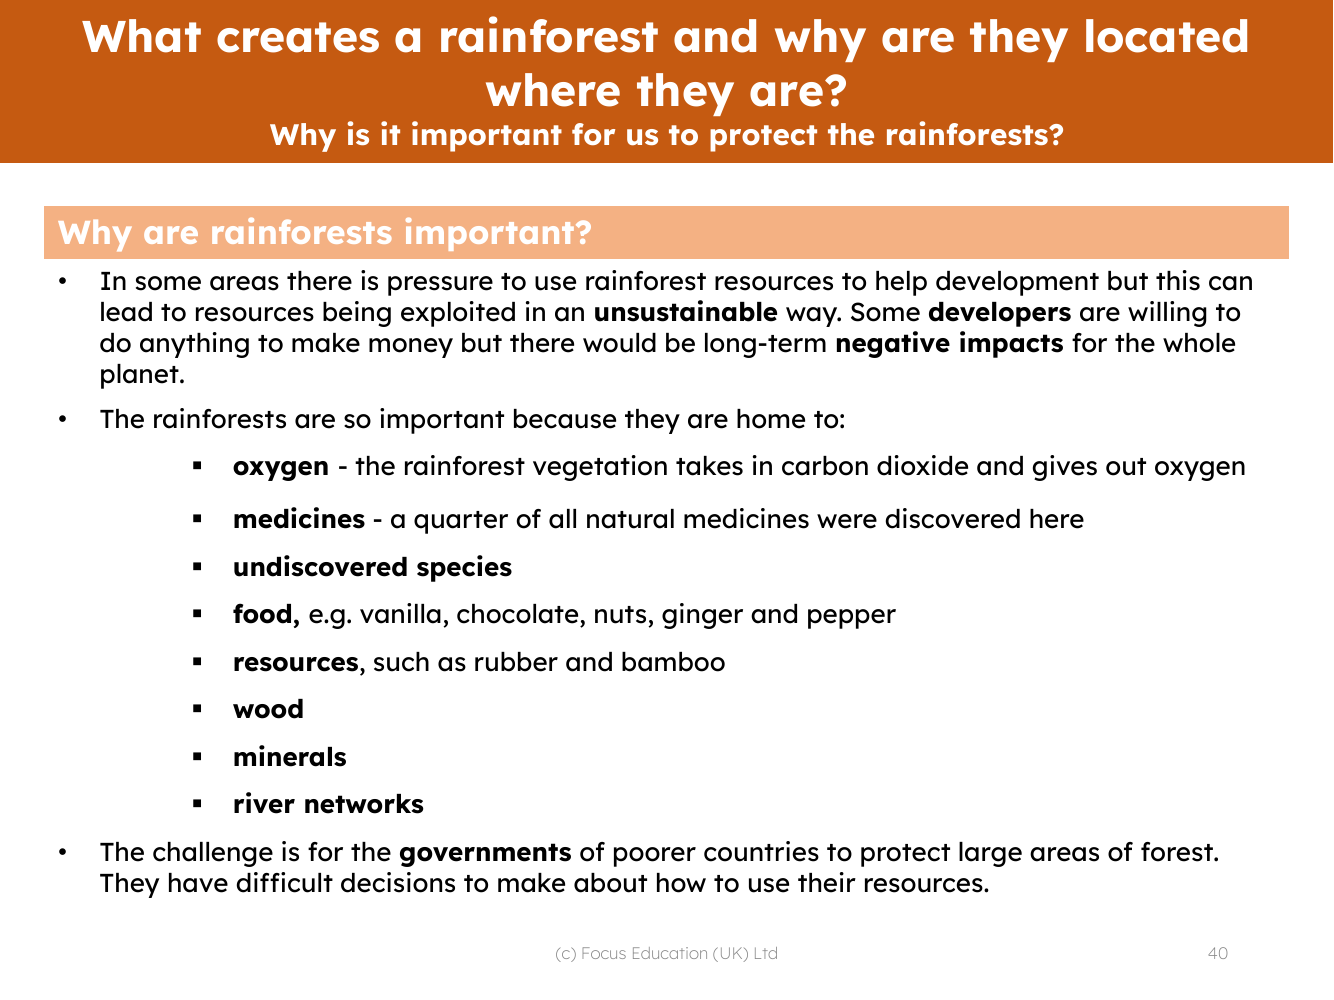 Why are rainforests so important? - Info sheet